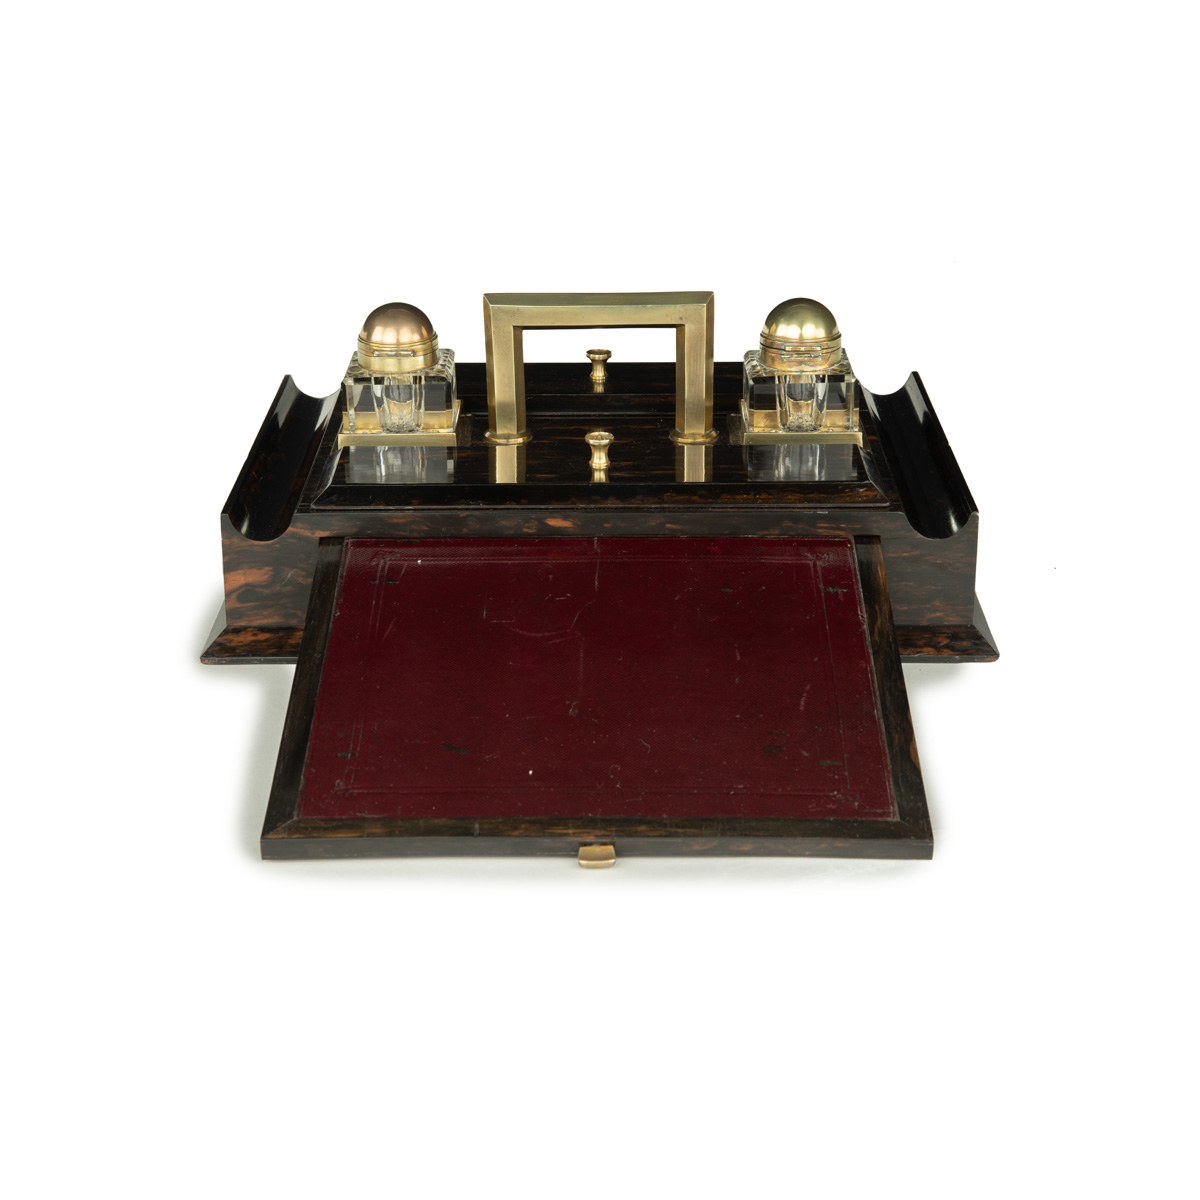 A Victorian coromandel Partners’ Ink Stand by Betjemann & Sons, retailed by Hardy Brothers, Sydney,